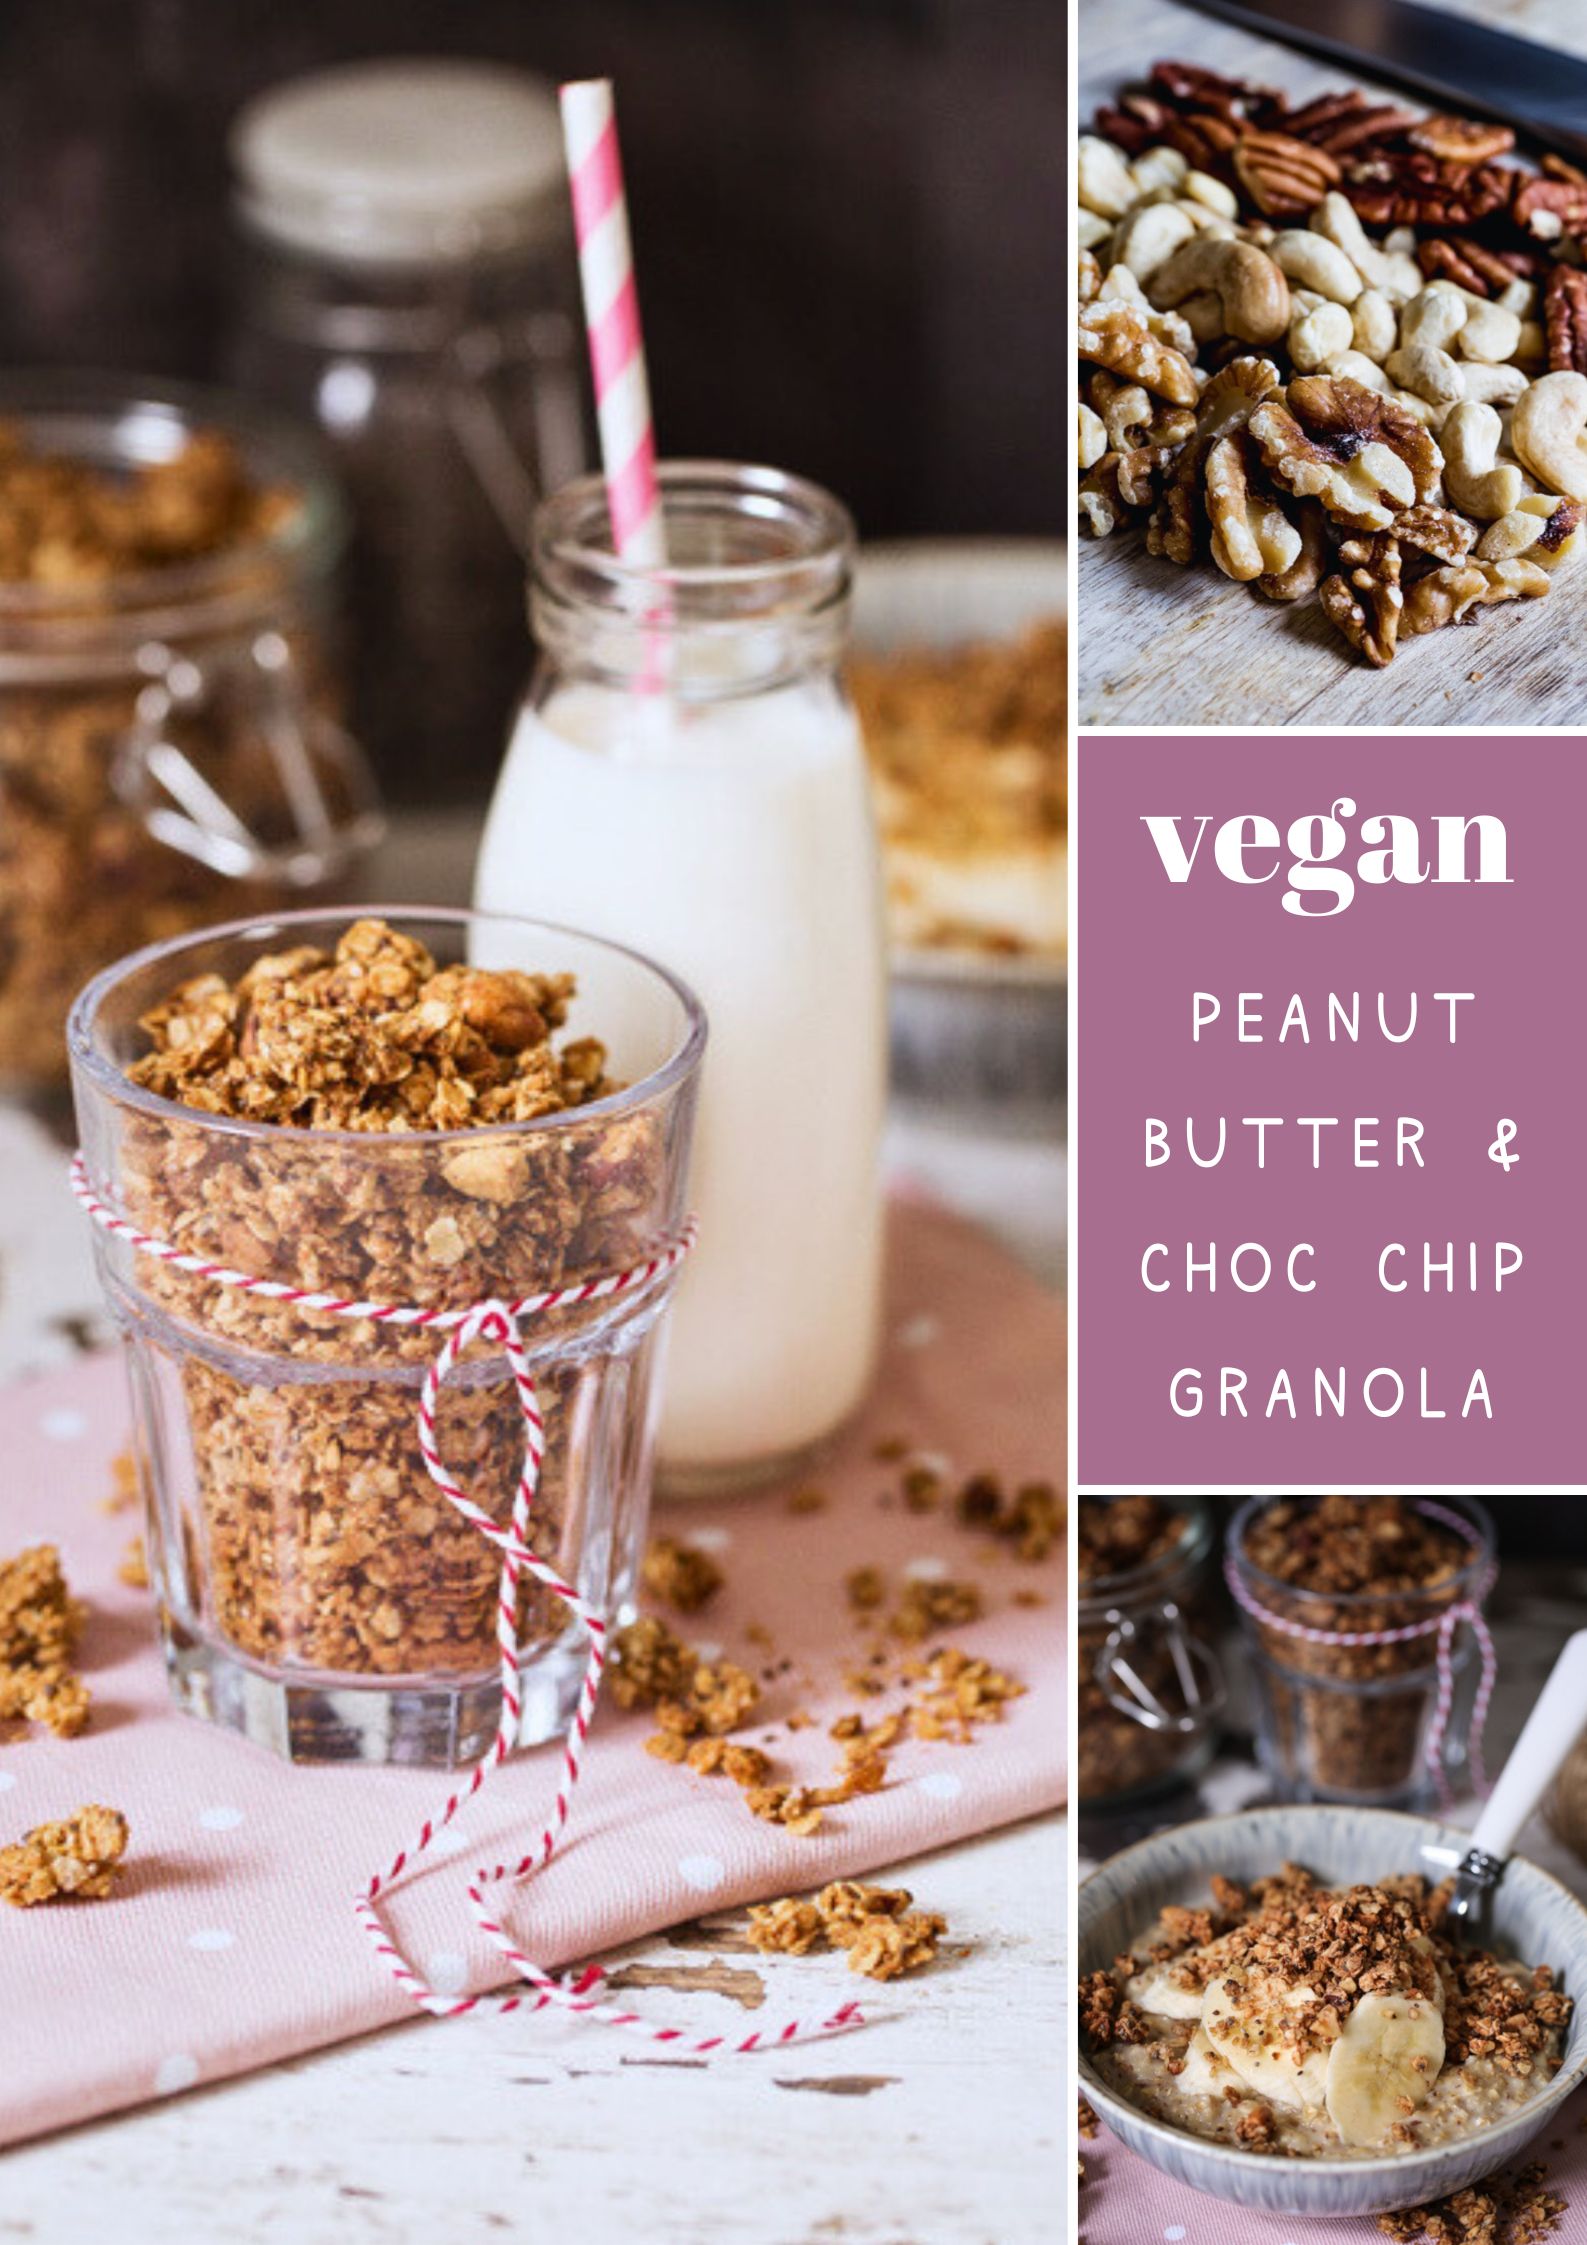 This healthy homemade peanut butter granola loaded with chopped nuts and dark chocolate chips is the perfect make ahead breakfast or quick snack! Sugar free and gluten free too! Recipe on thecookandhim.com | #granola #homemadegranola #healthygranola #sugarfreebreakfast